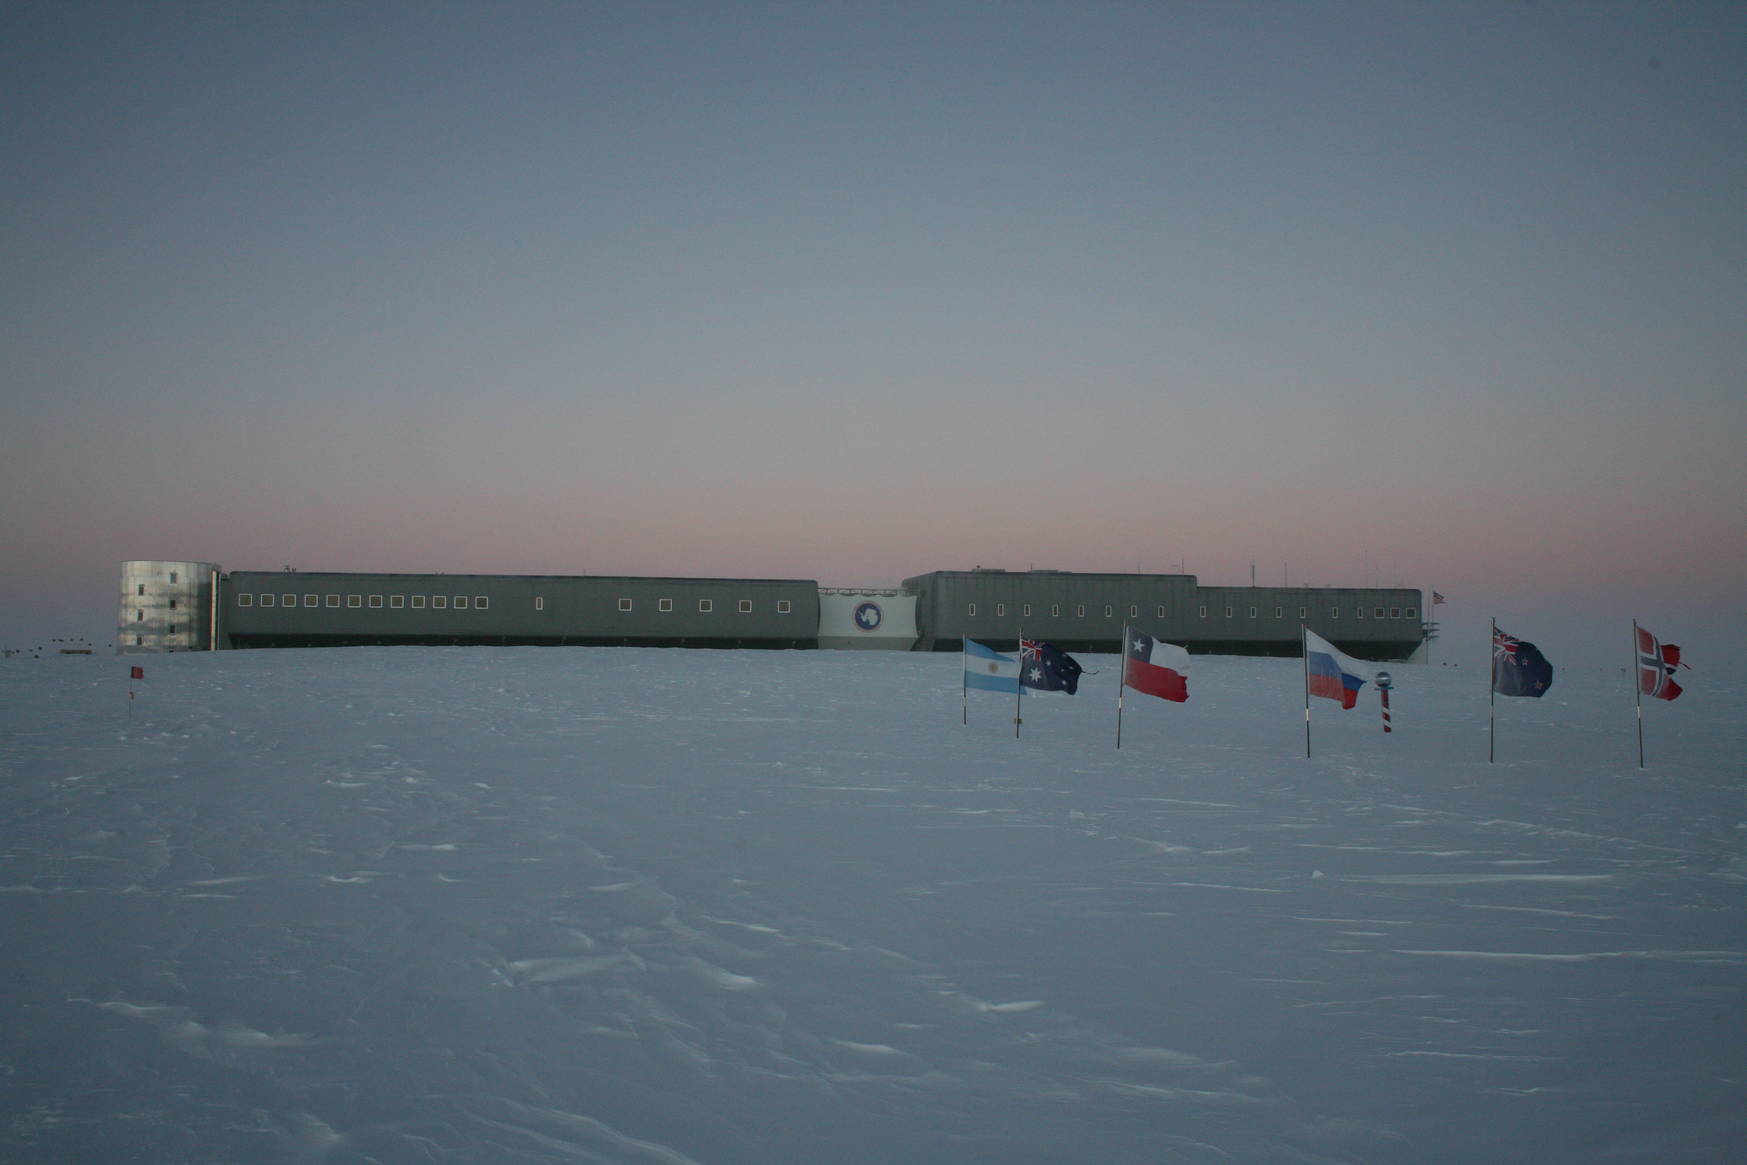 The ceremonial south pole and the south pole station during sunset (opposite of the sun).